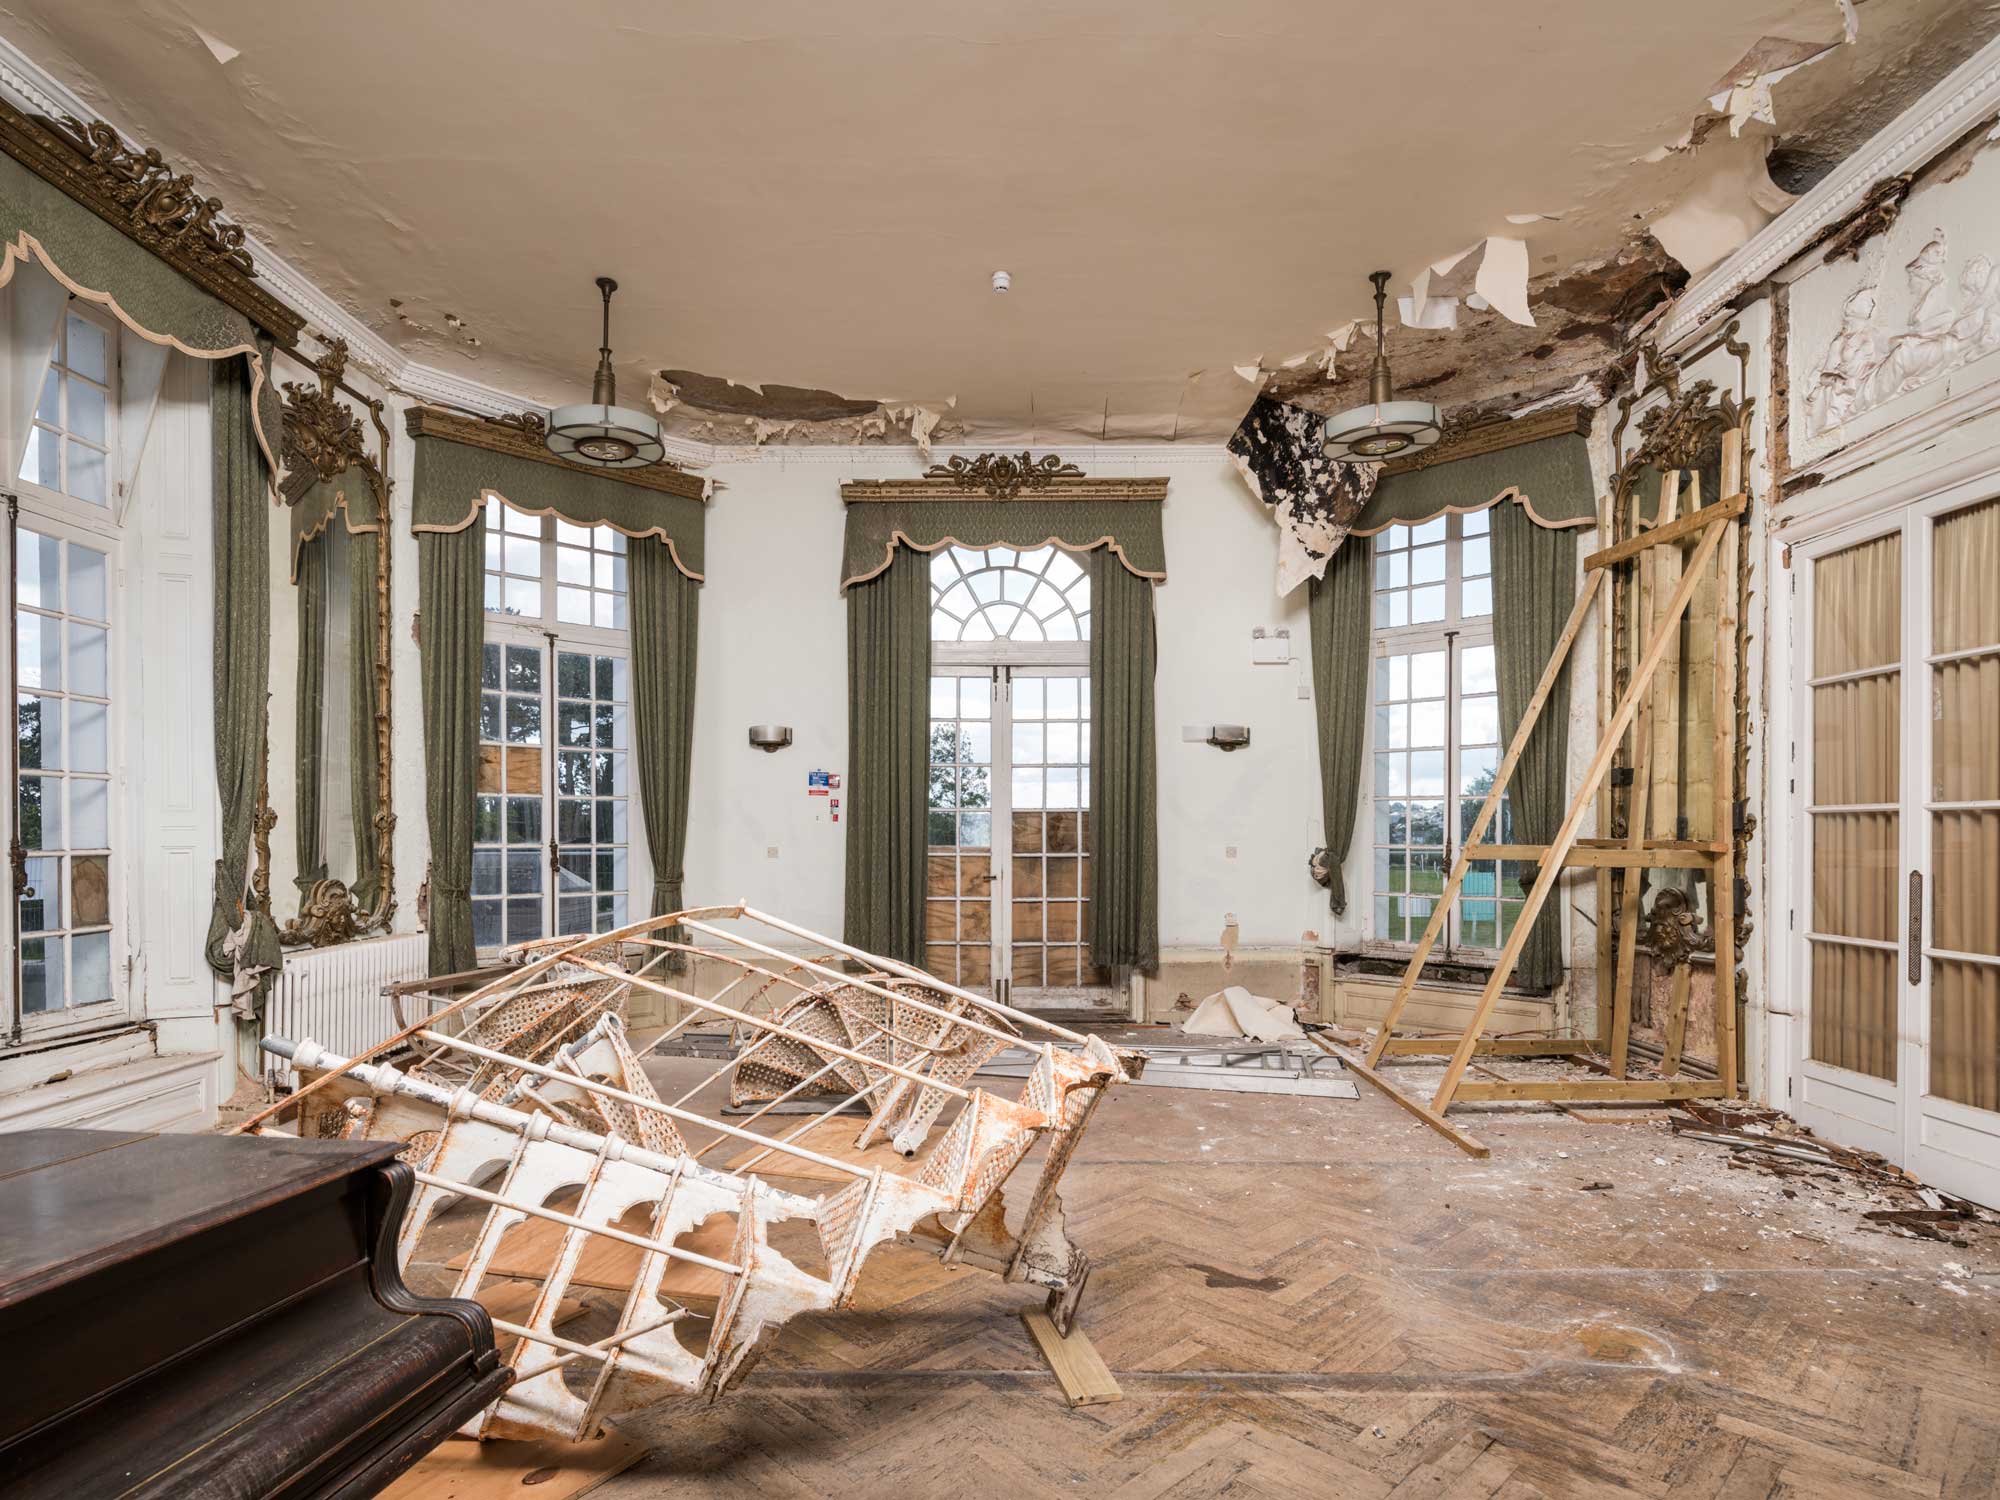 The derelict interior of a formal mansion room, with debris on the parquet flooring, a piano, and holes in the plasterwork. 